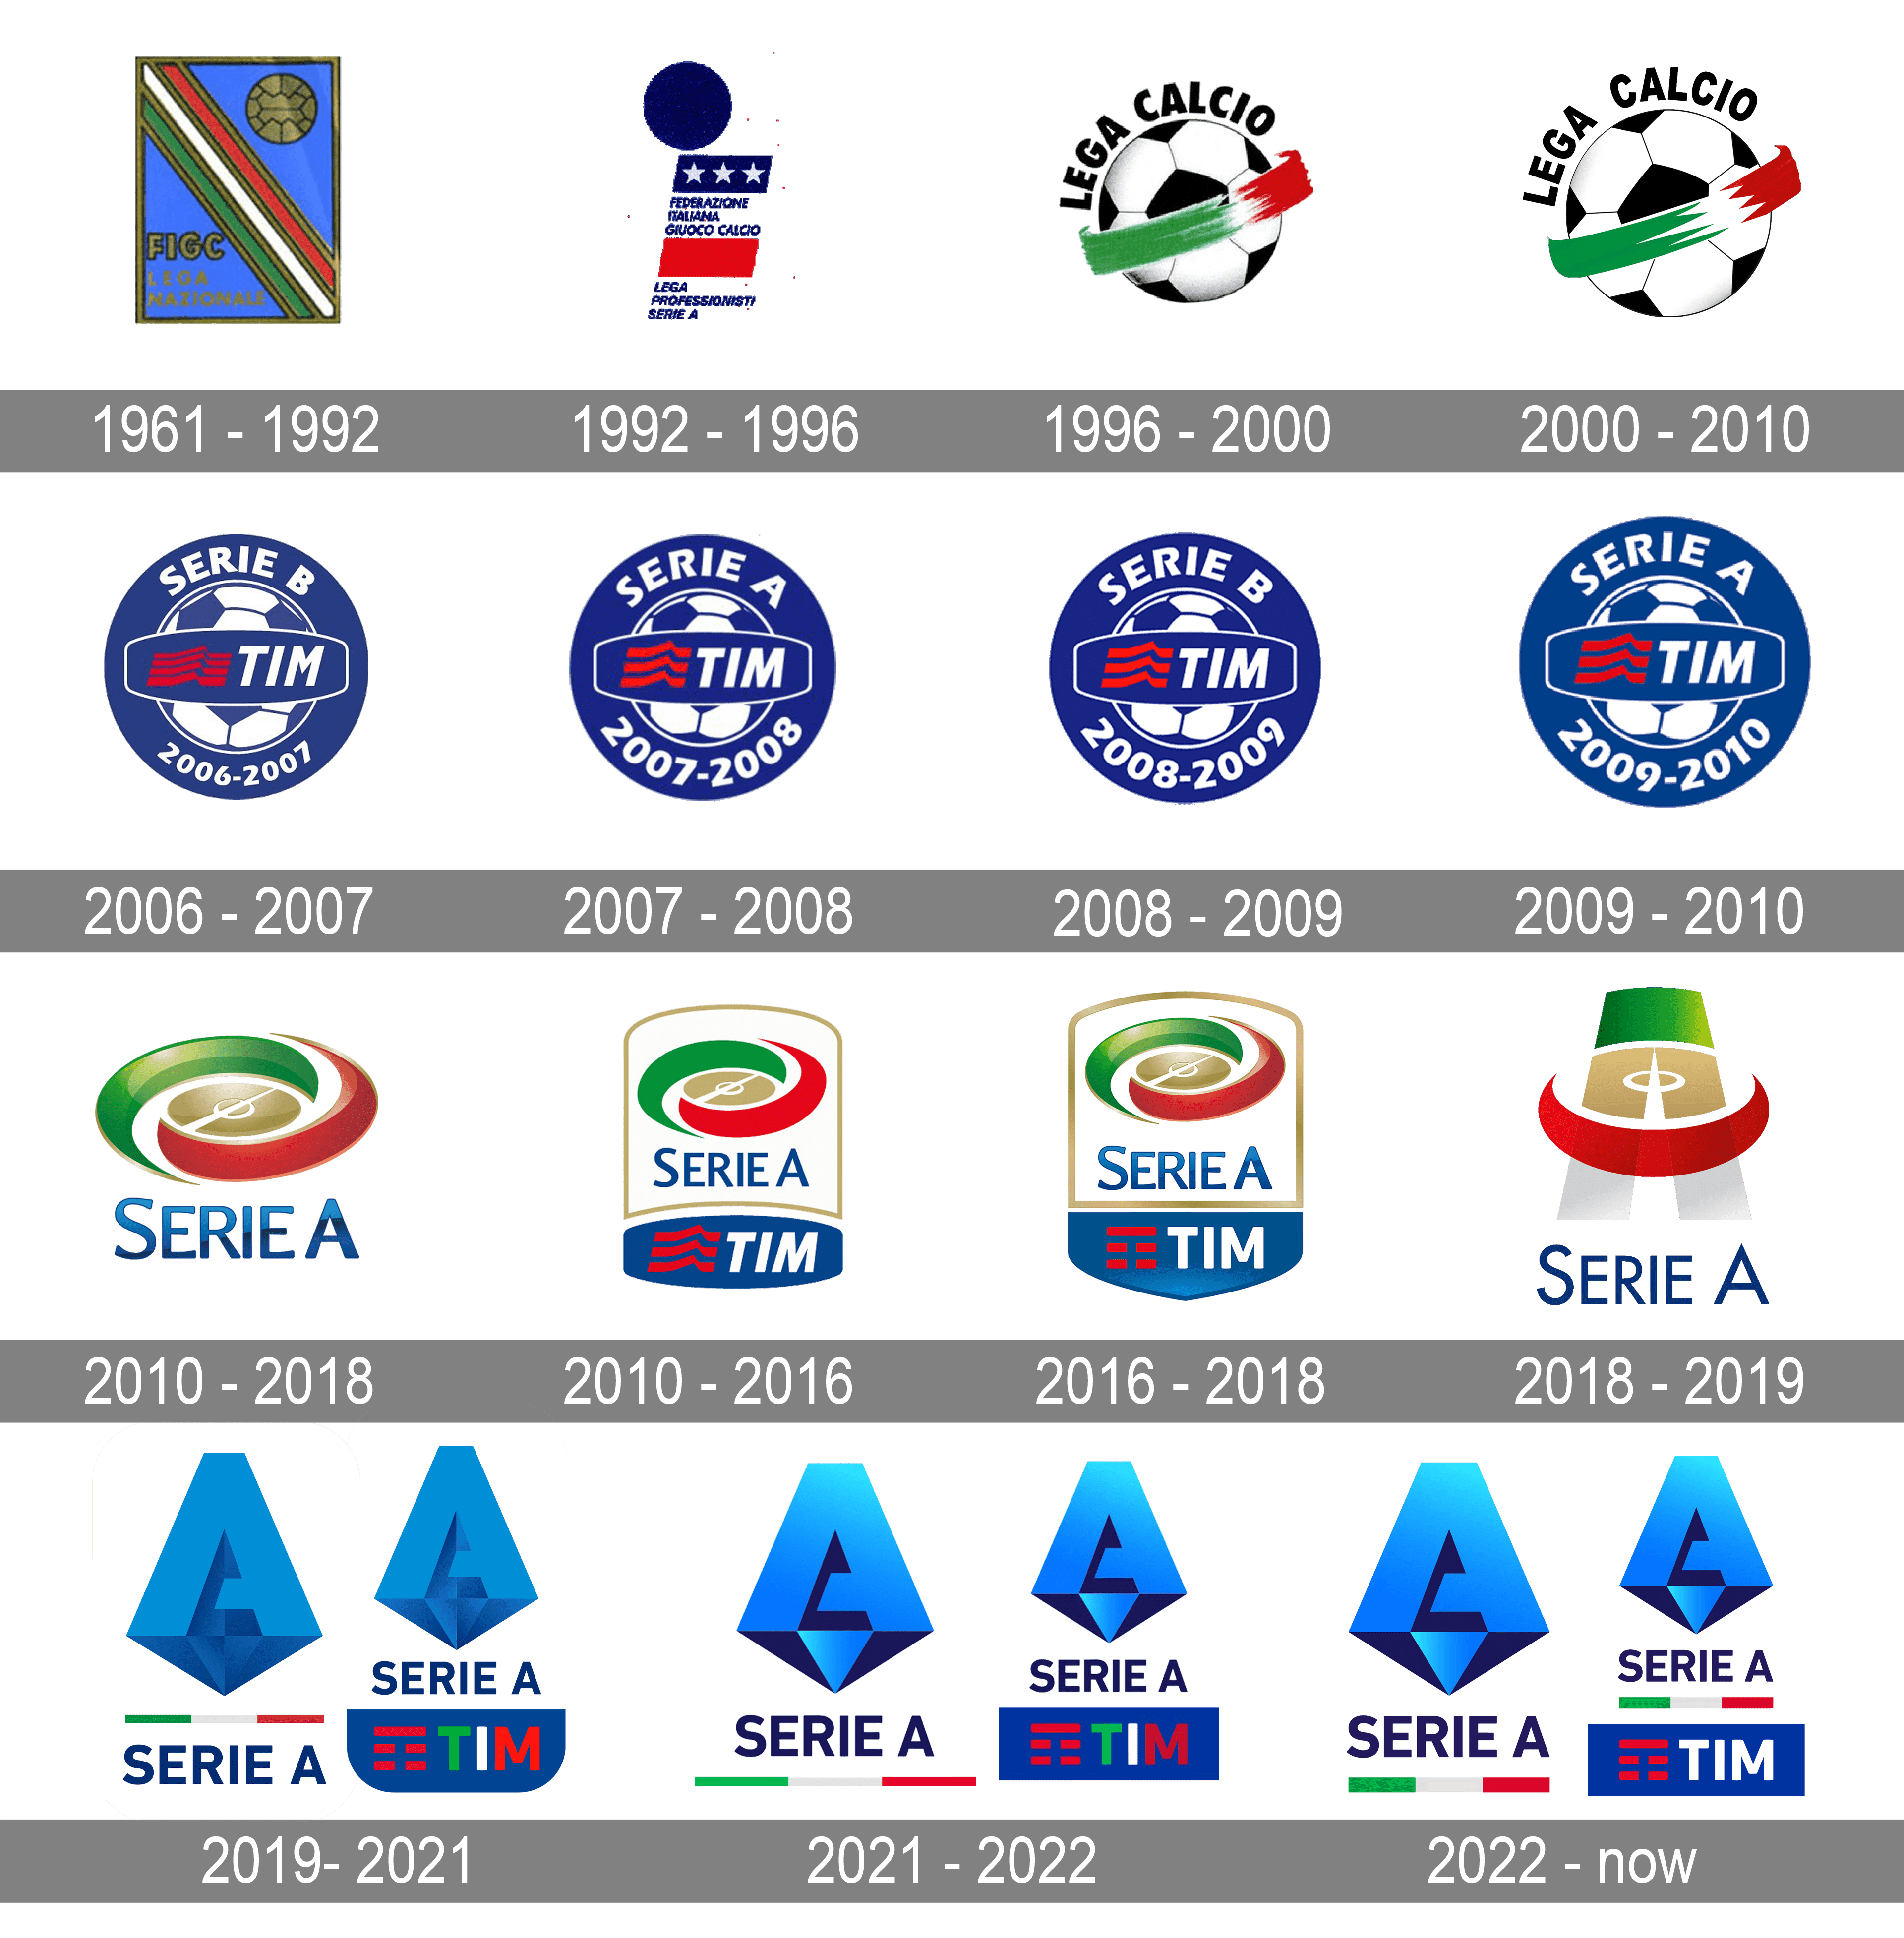 2006-2007_Serie B.png